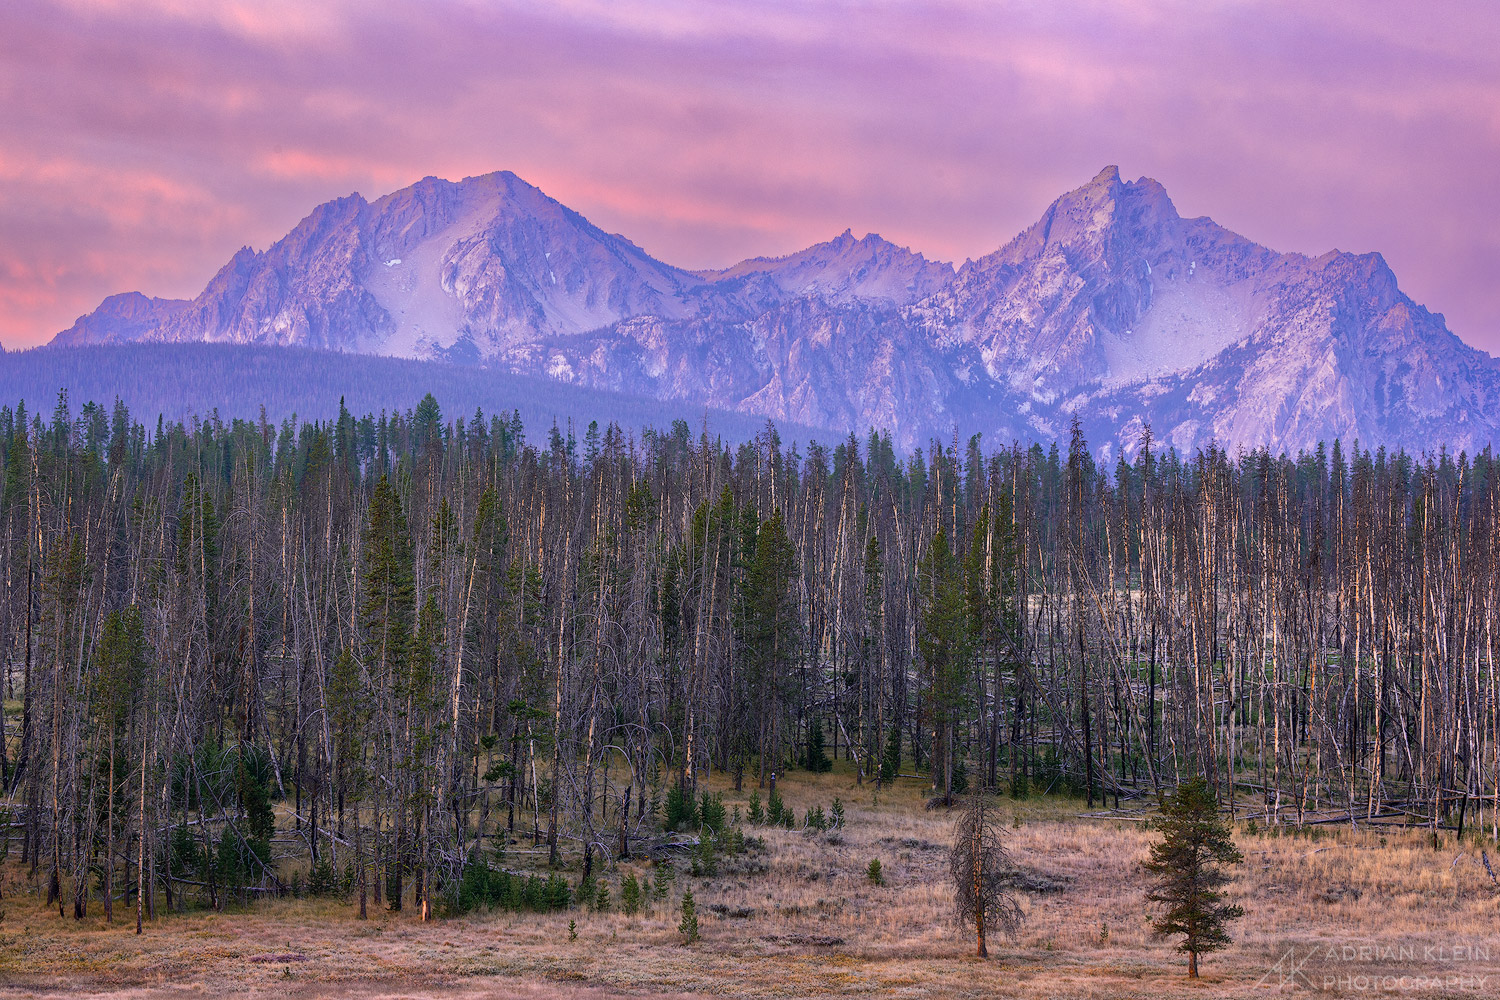 View of Sawtooth Mountain Range in Idaho during a colorful sunrise in fall.